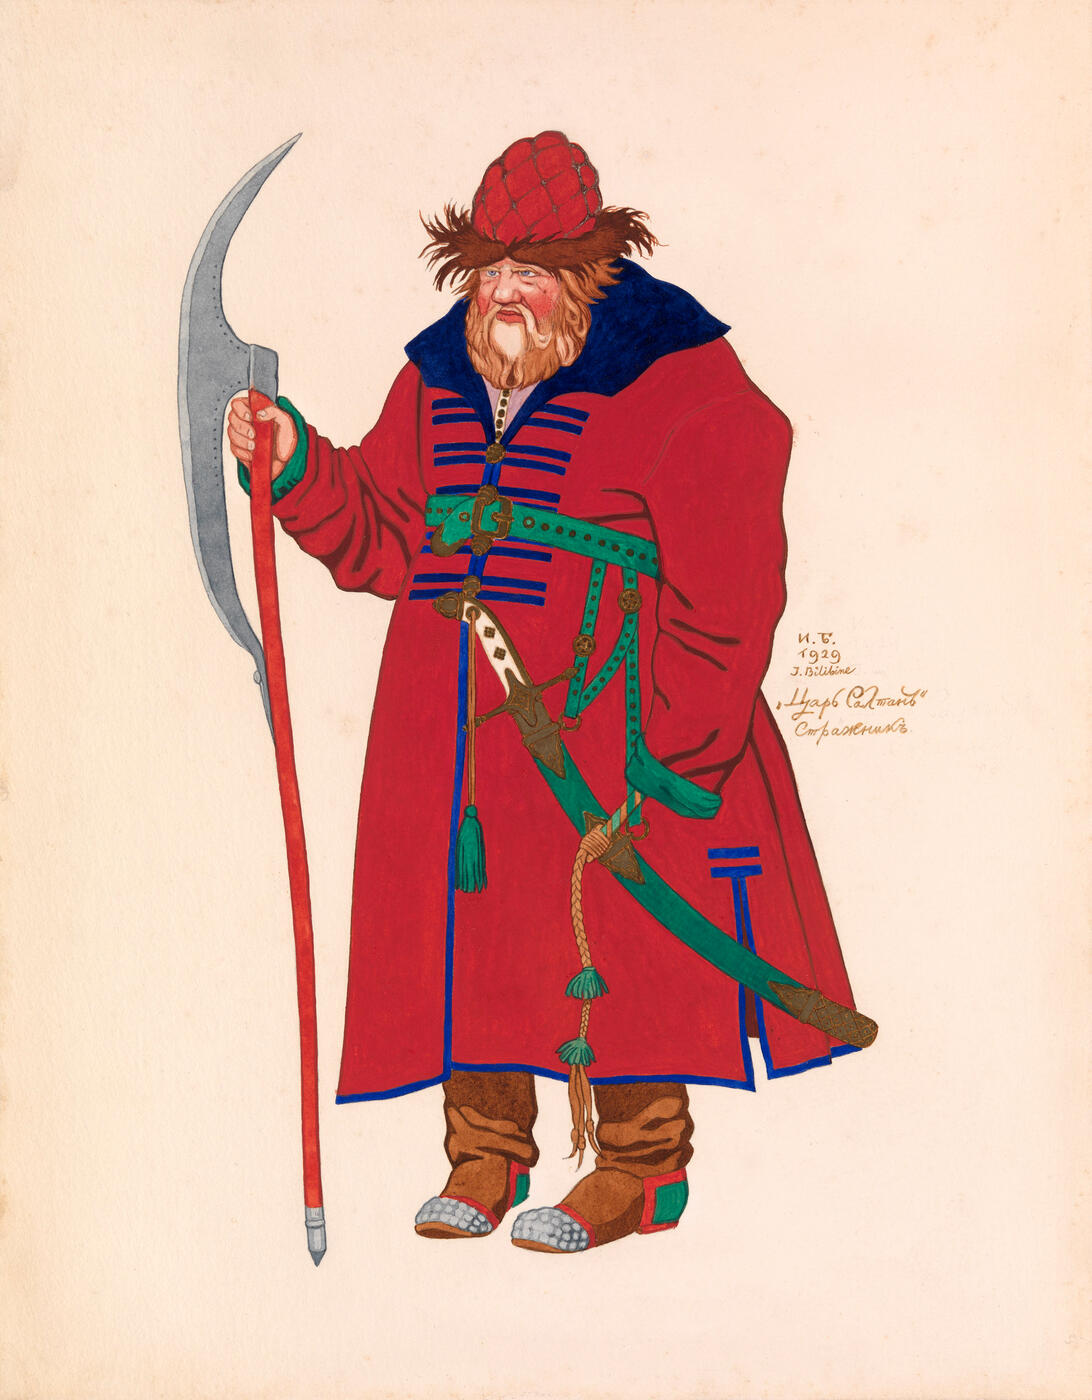 Guard. Costume Design for "The Tale of Tsar Saltan"